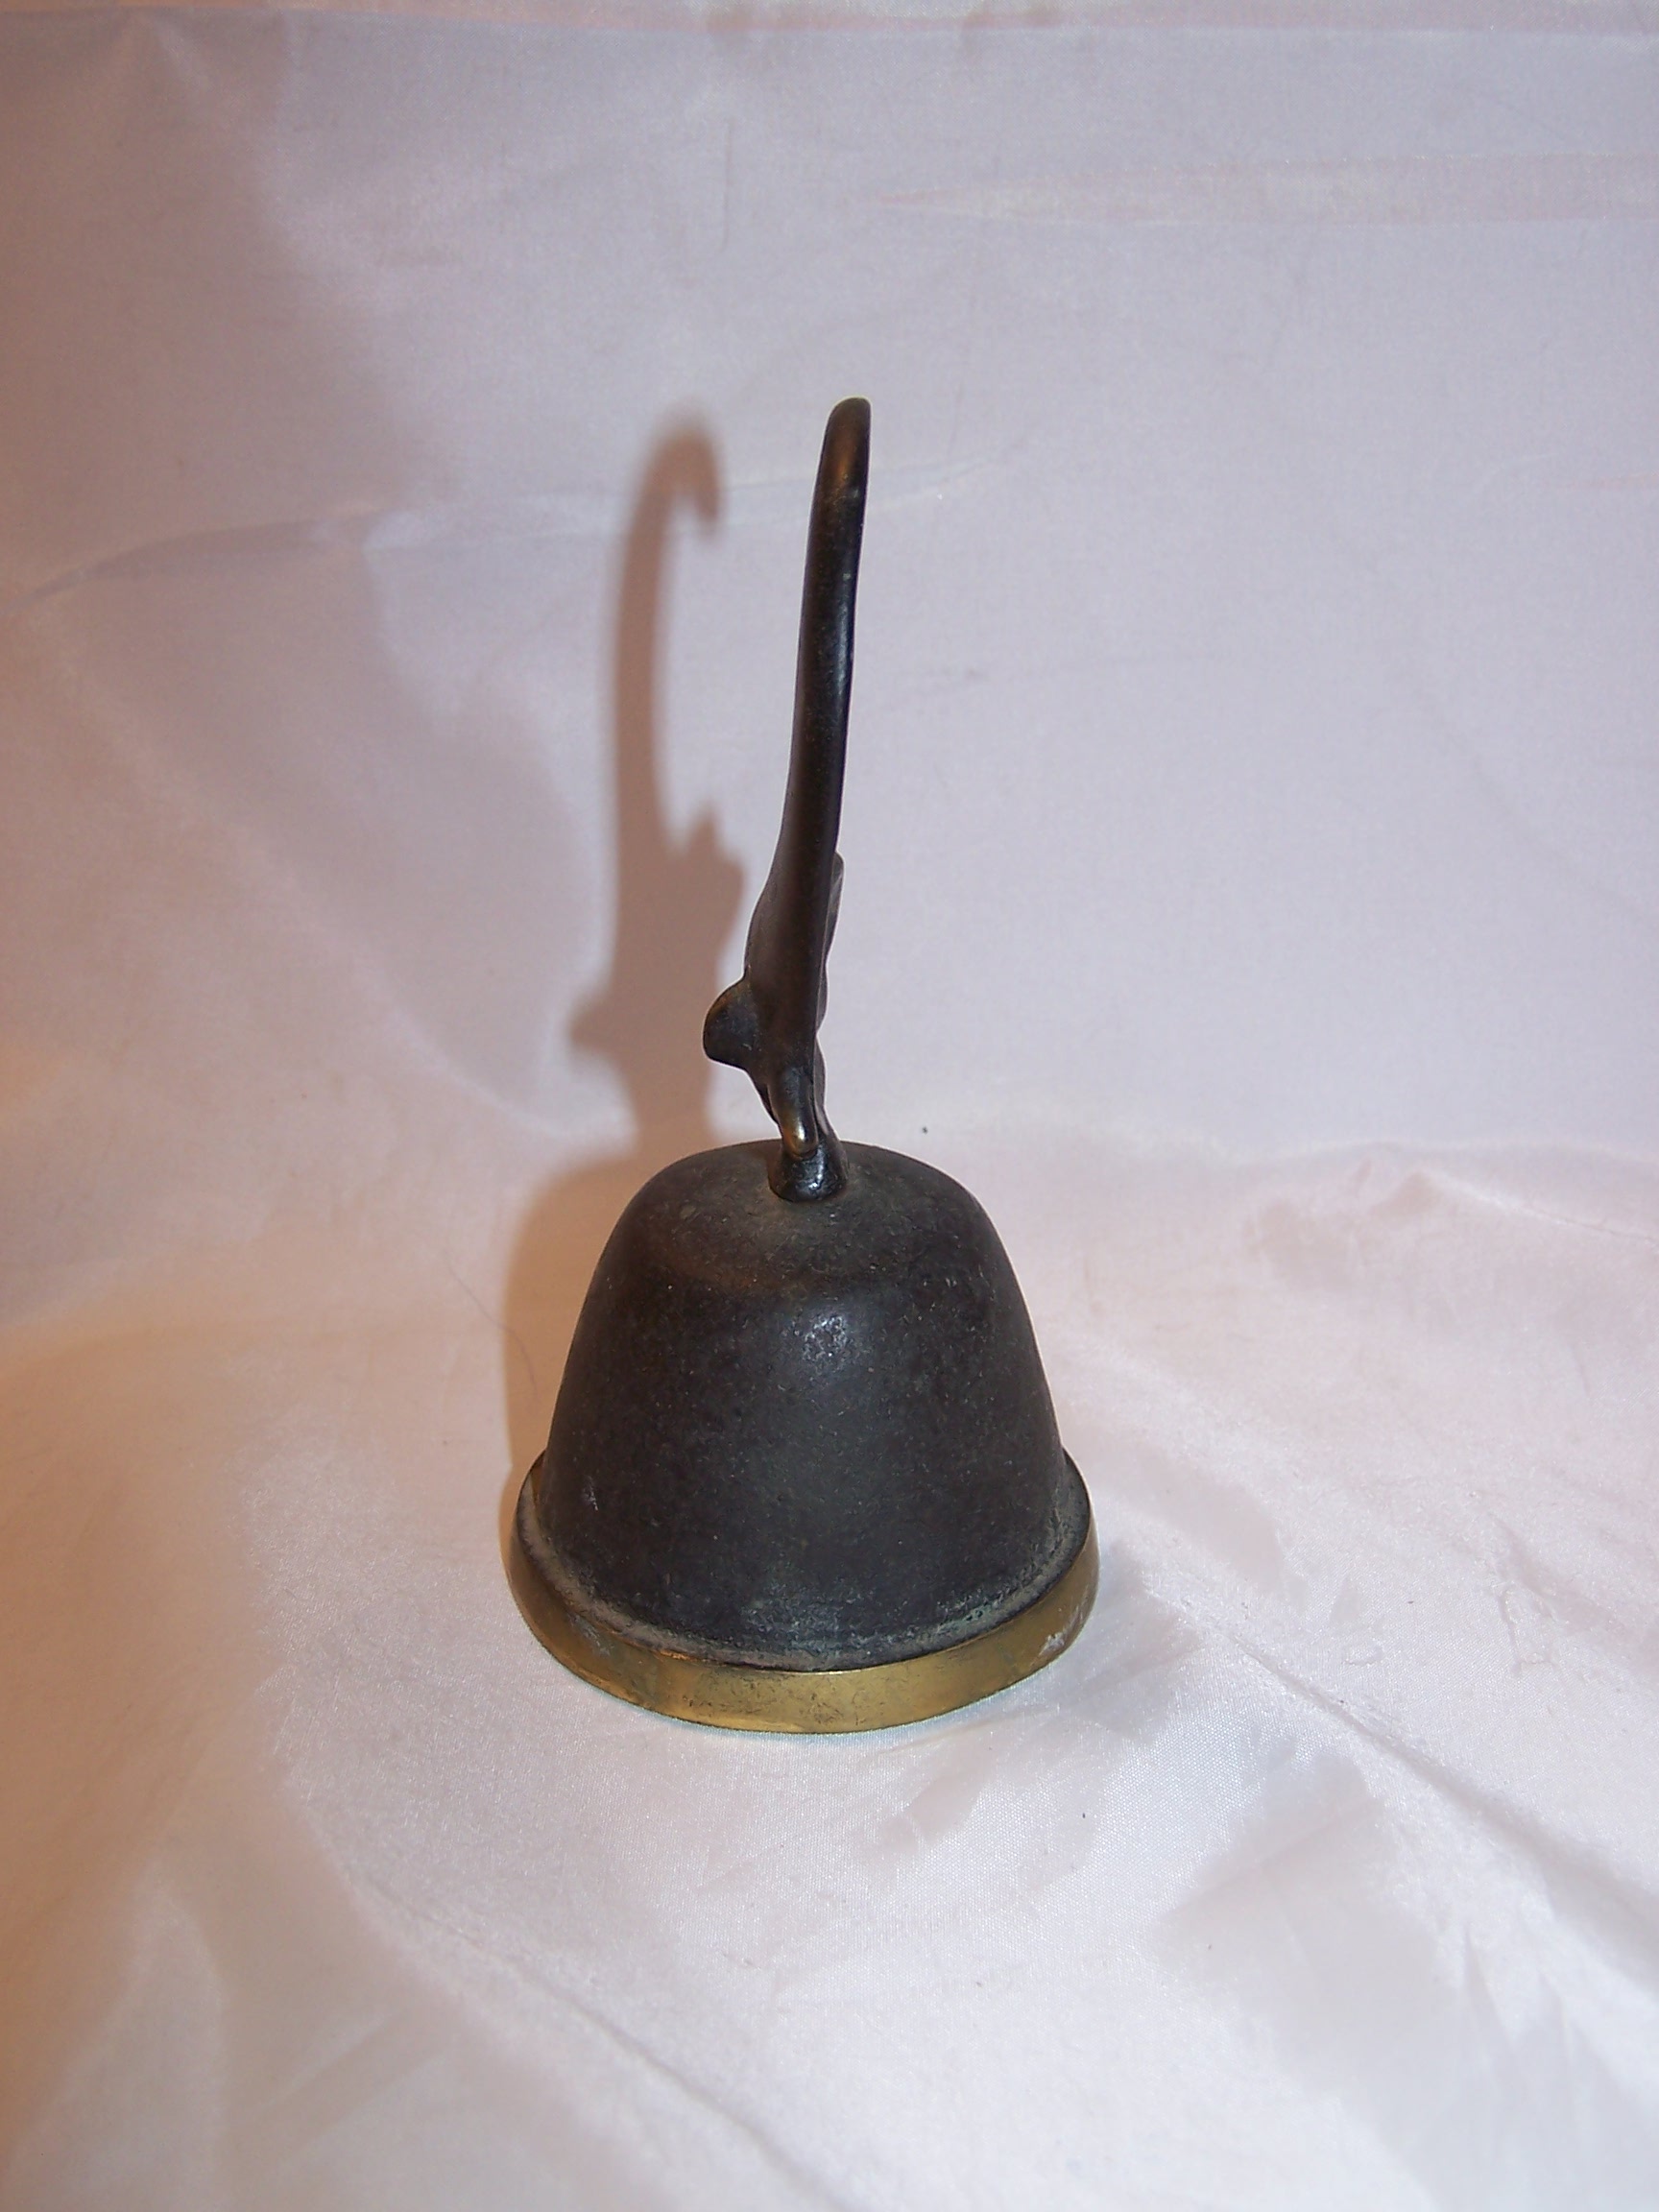 Image 2 of Elf Bell with Curled Tip Cap, Solid Brass, Patina, Vintage